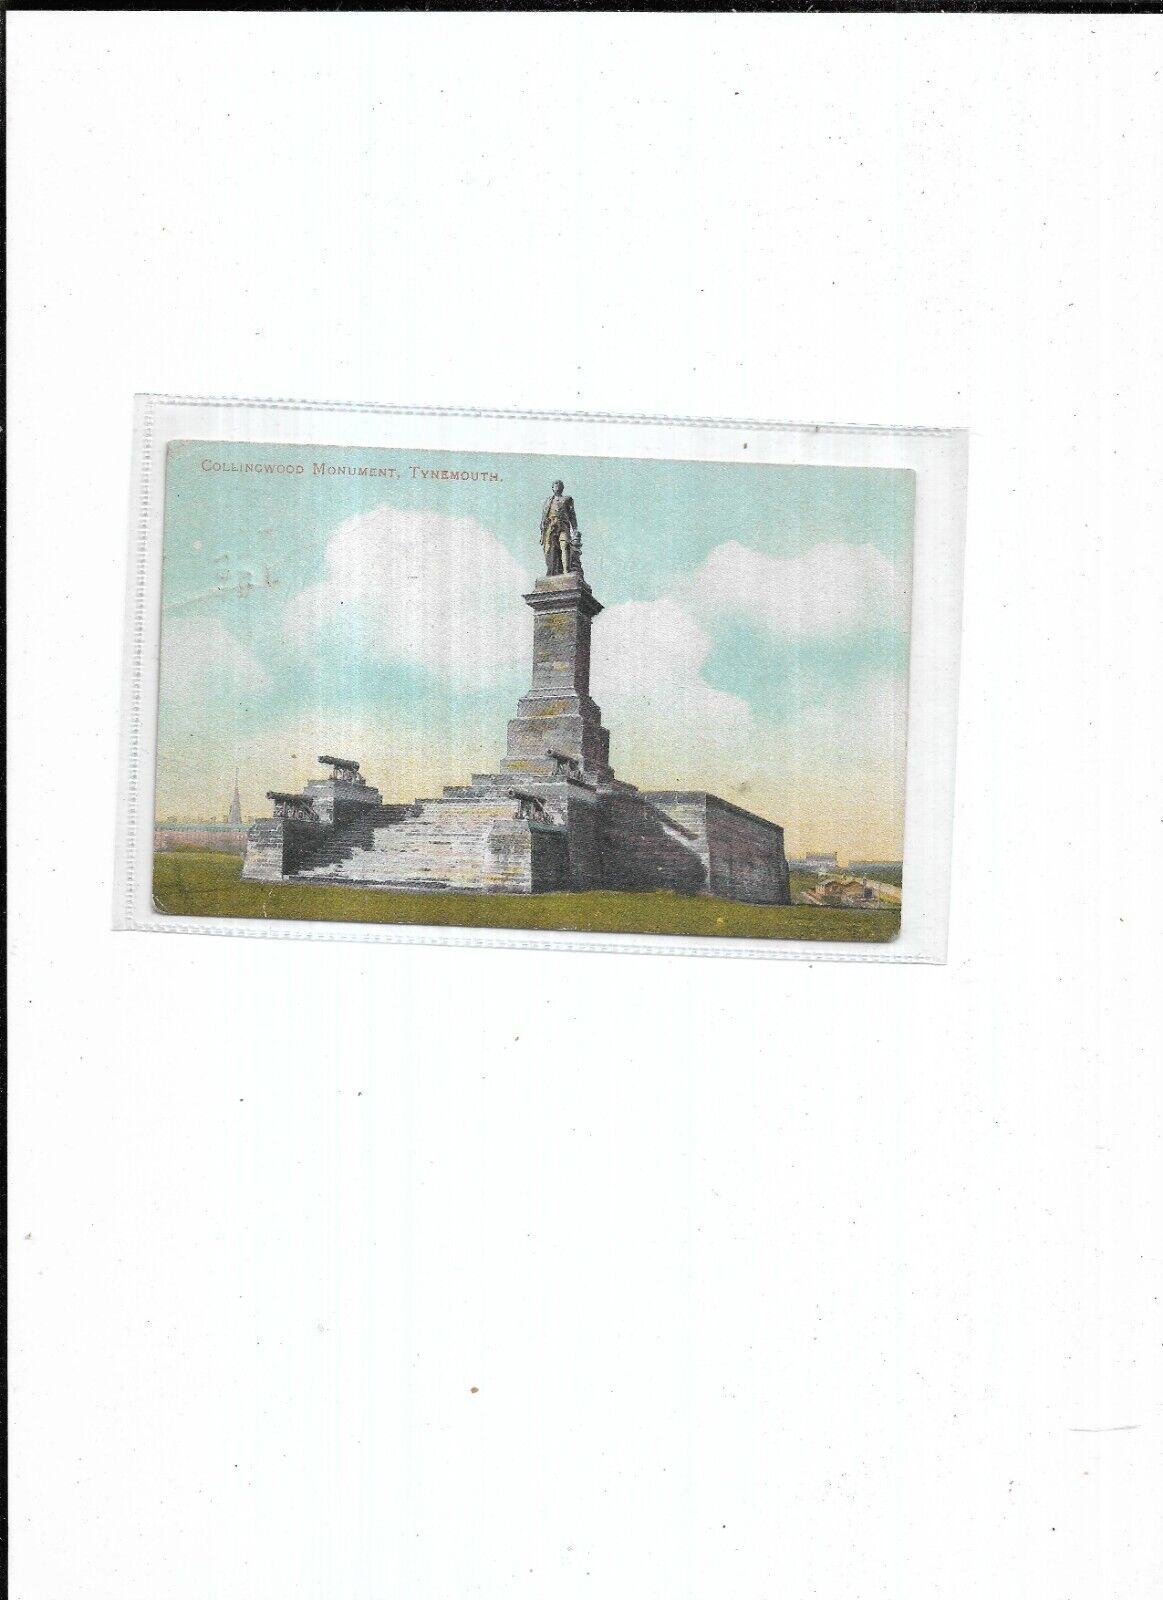 House Clearance - Northumberlan Service 1499 "Collingwood Monument, Tynemouth" Postmarked 1907